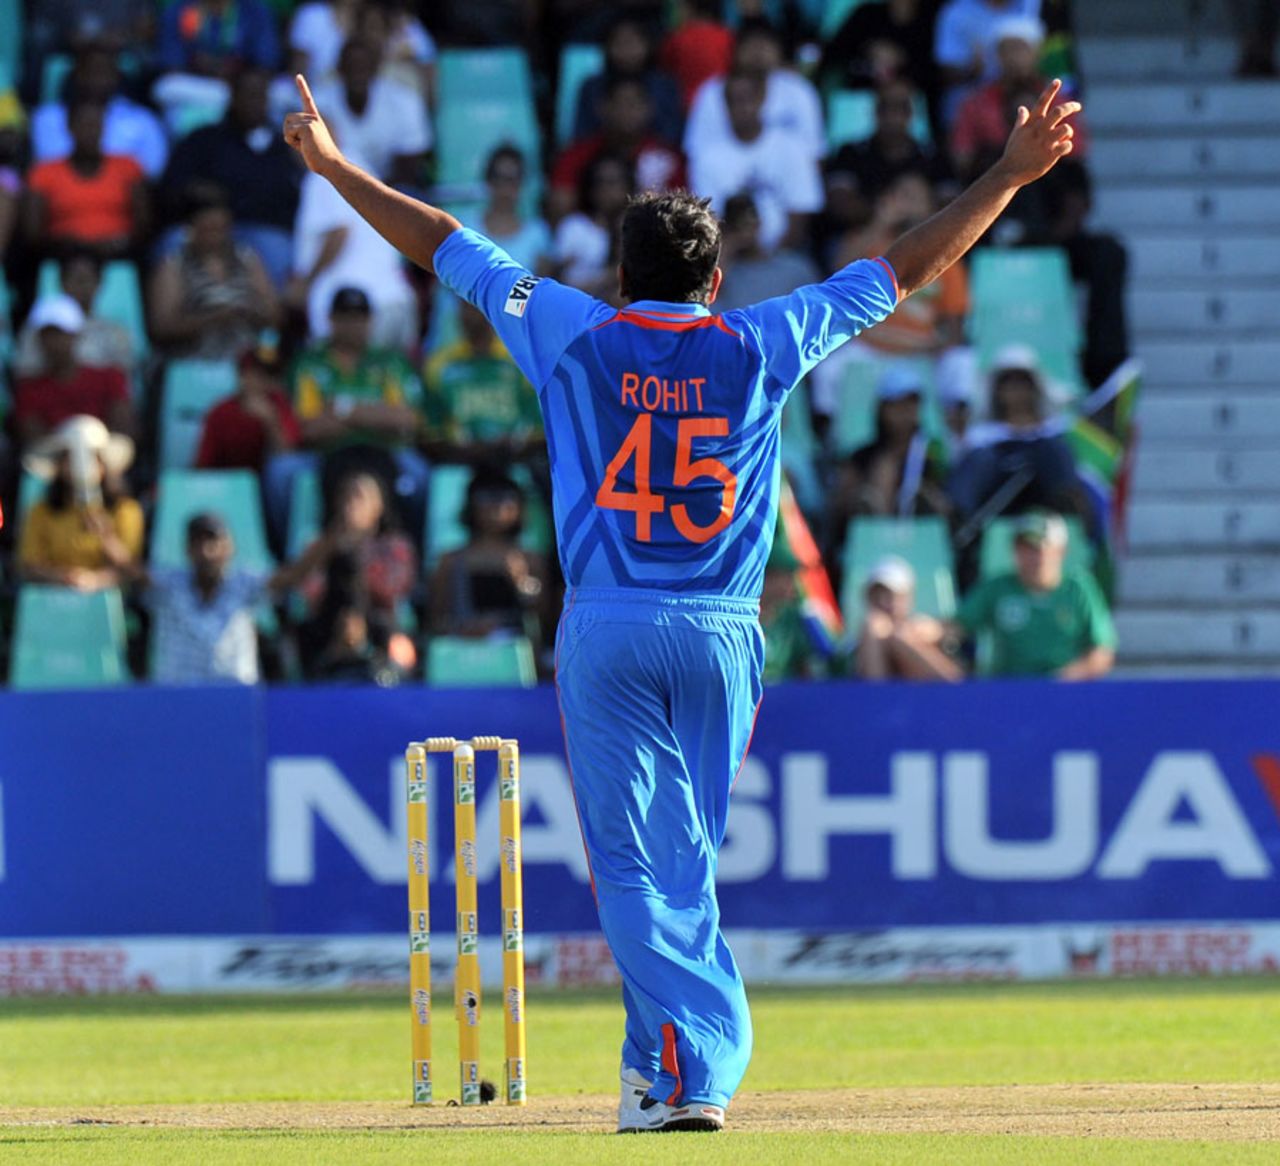 Rohit Sharma plays to the crowd after his second wicket, South Africa v India, 1st ODI, Durban, January 12, 2011